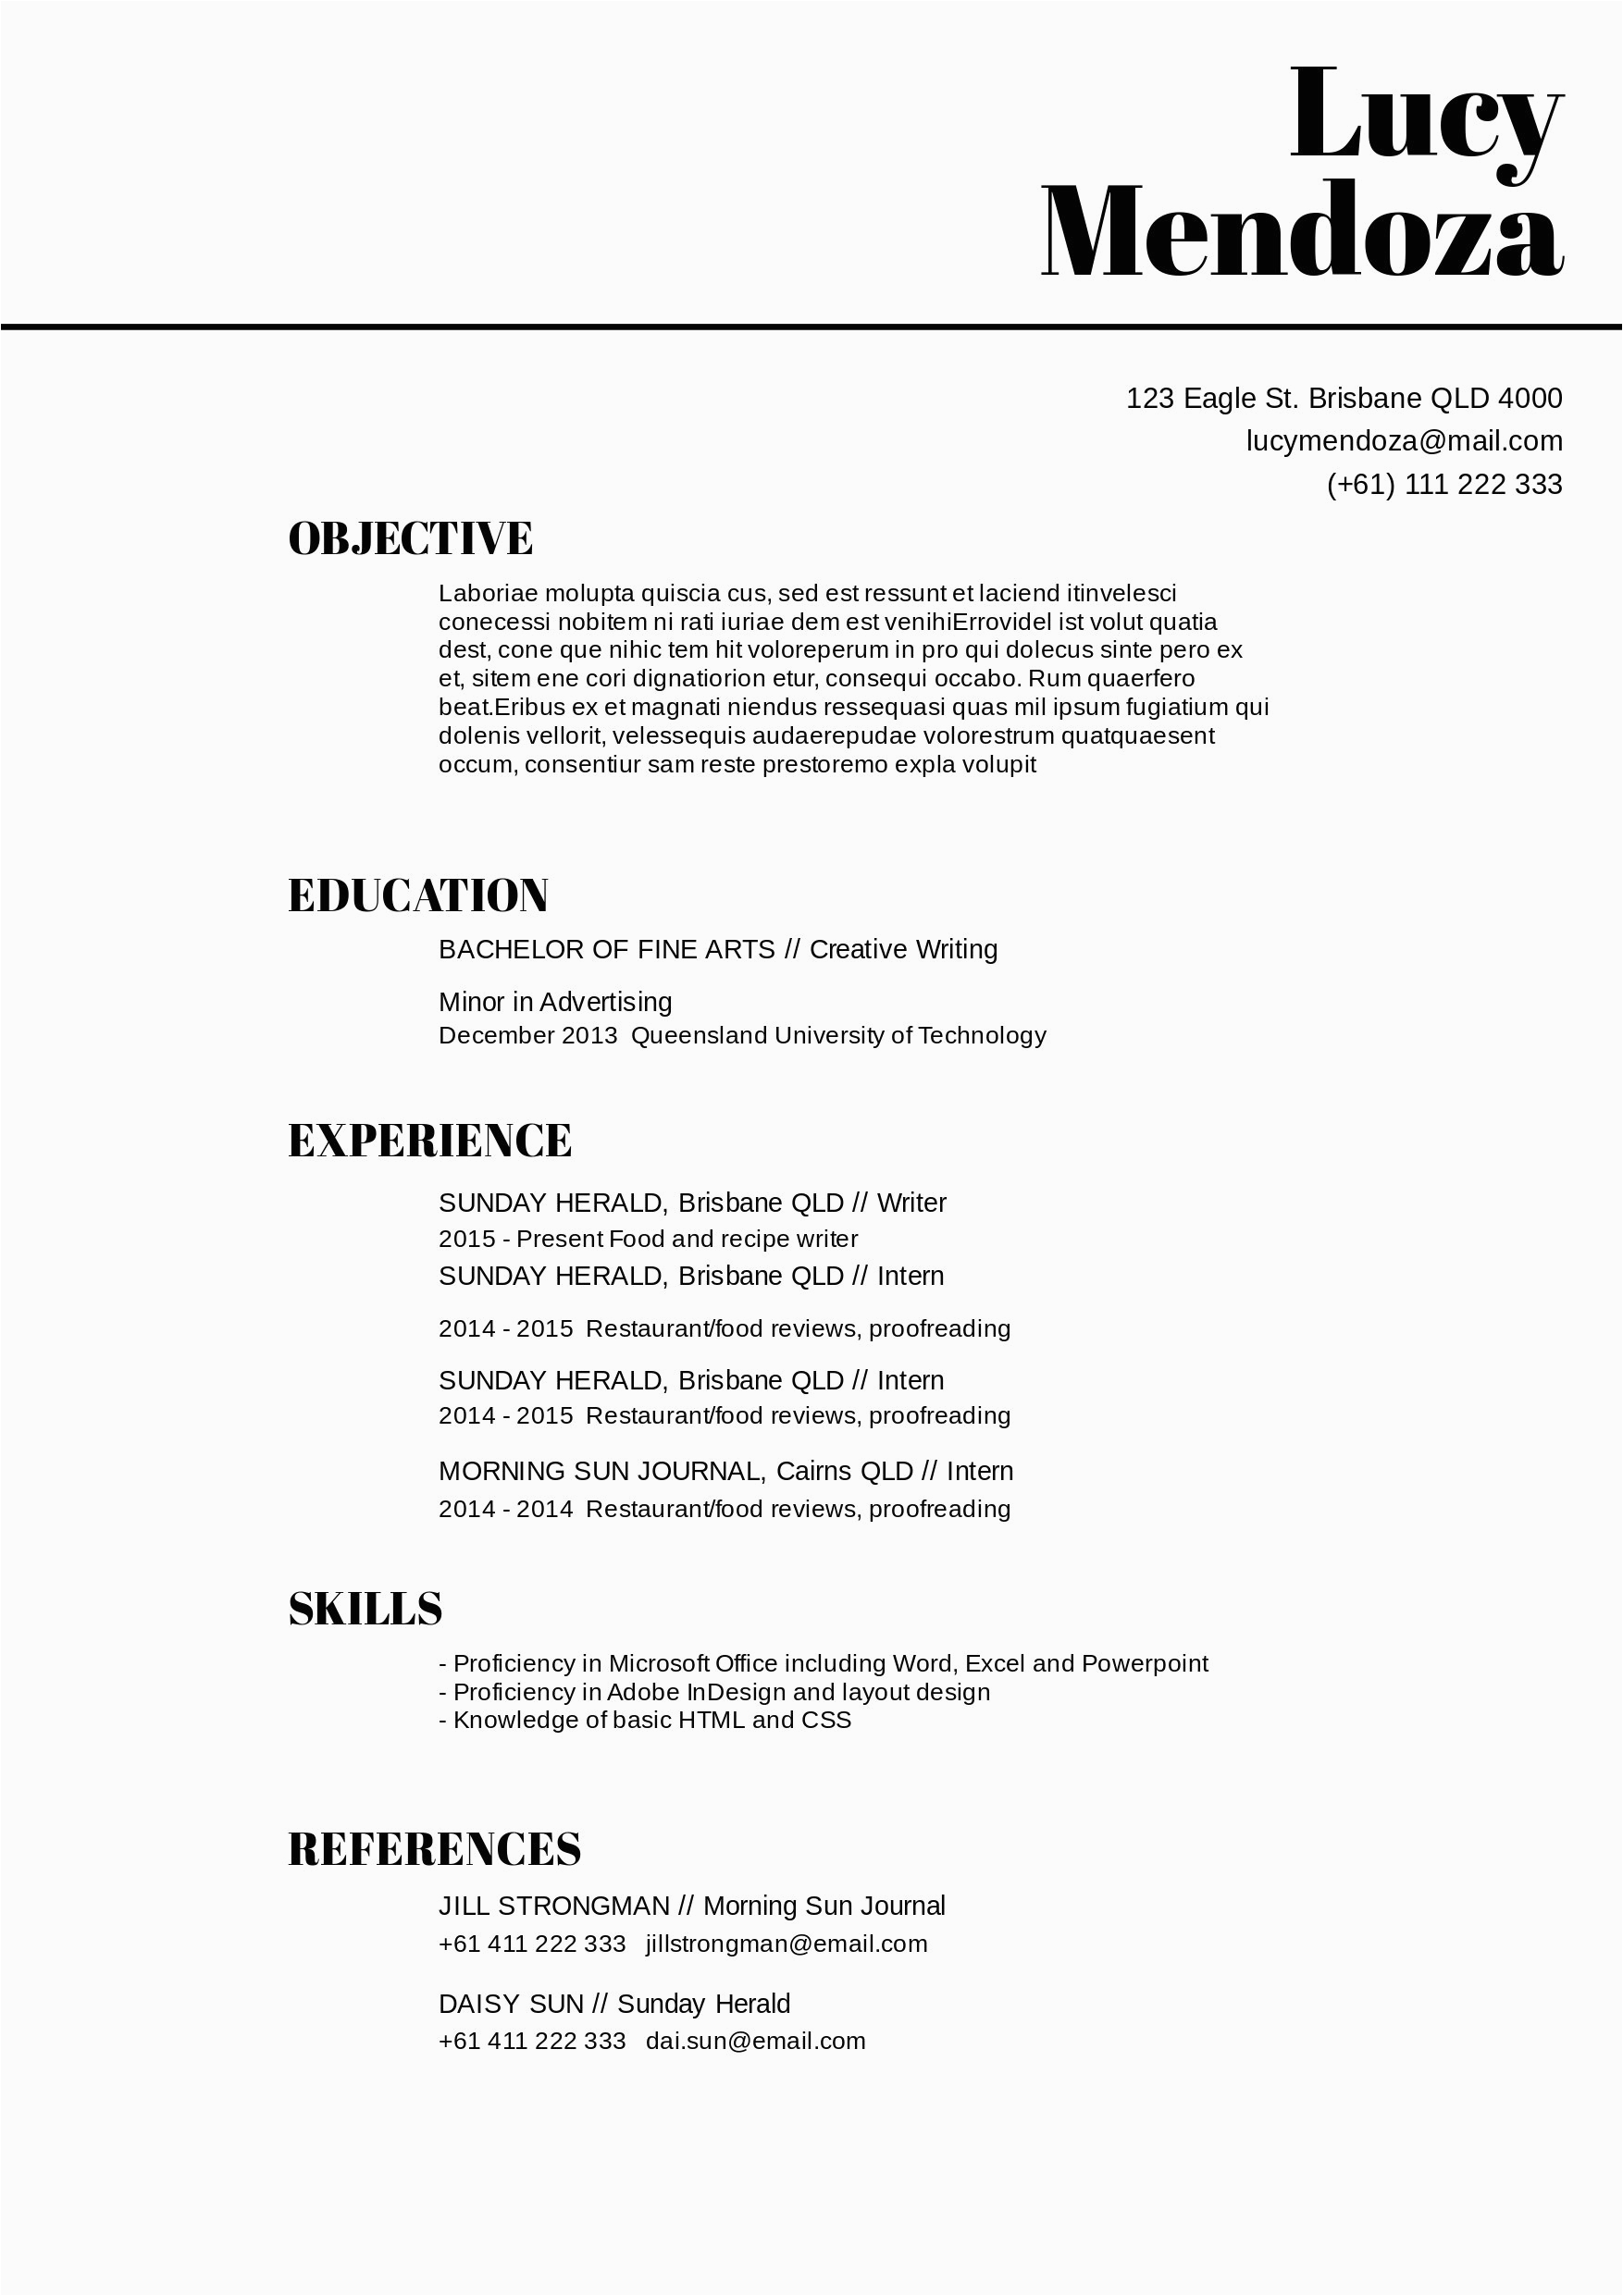 Free Resume Templates without Signing Up Resume Templates